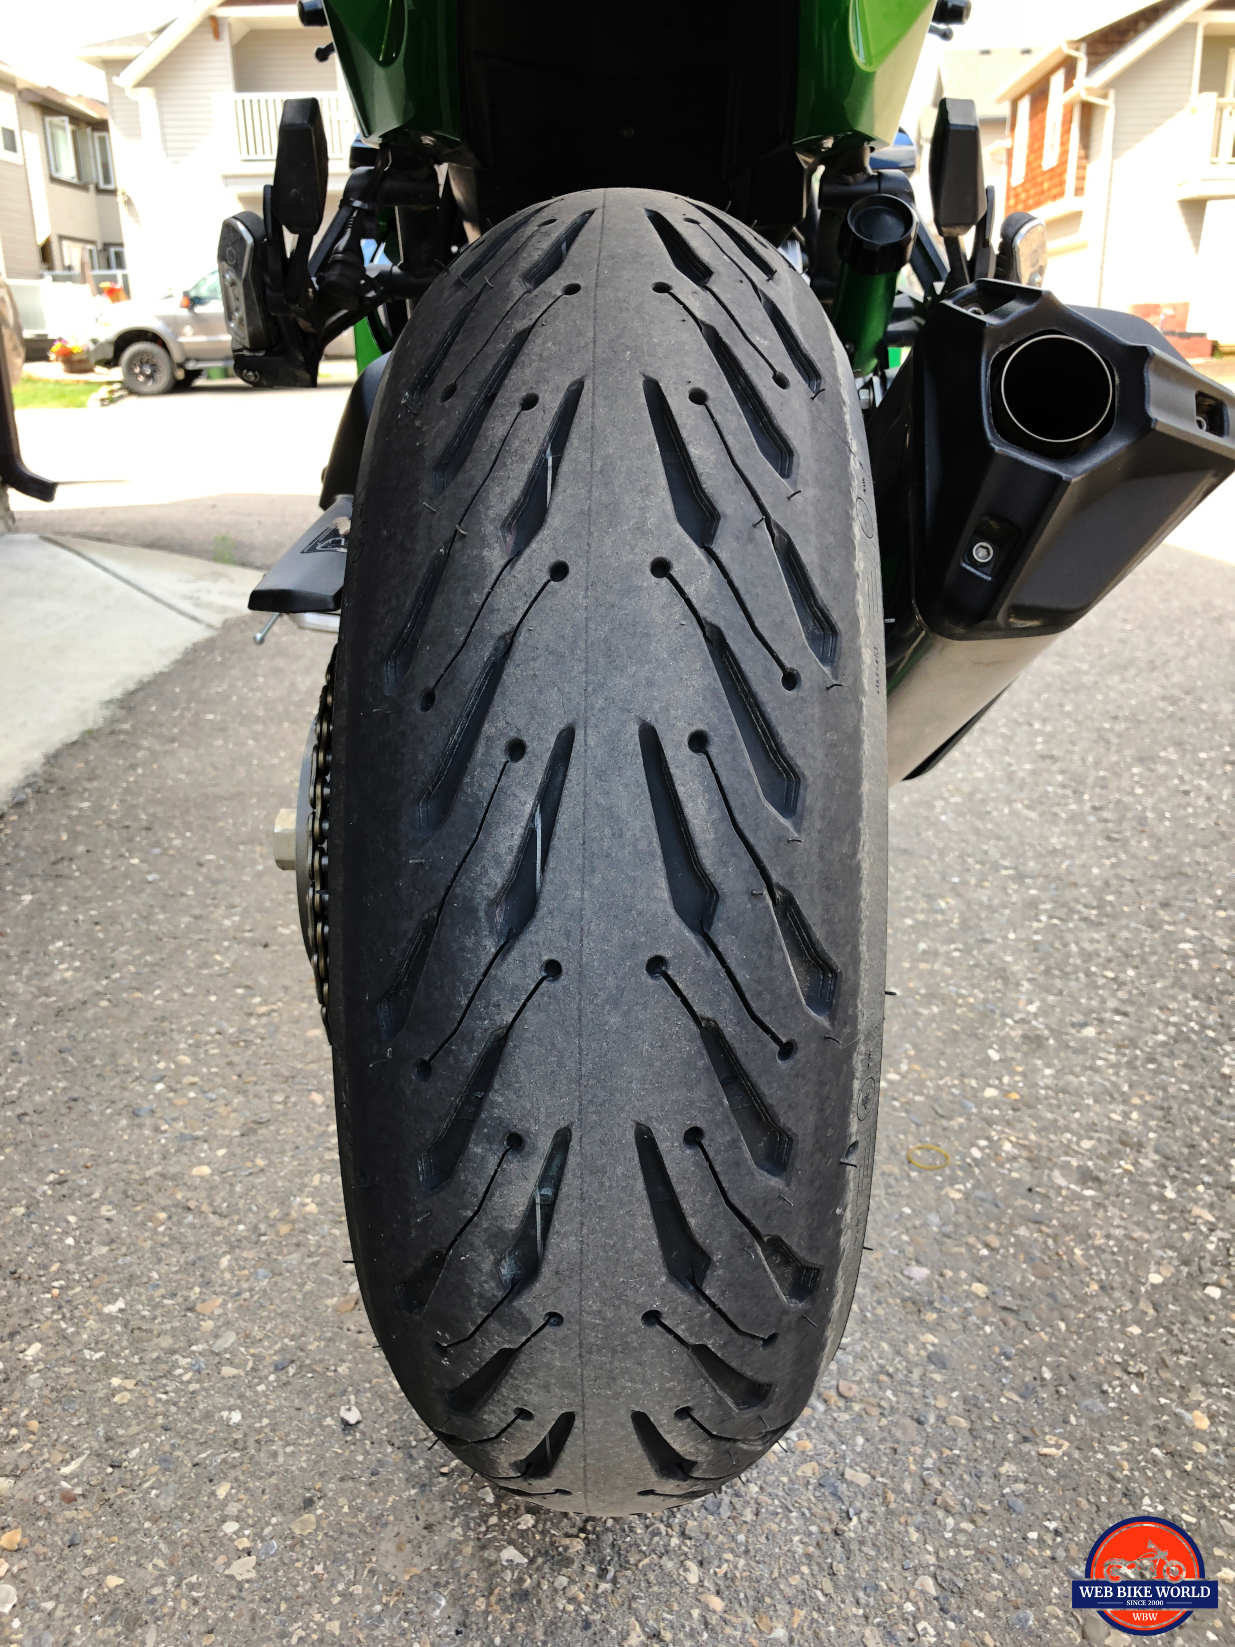 hebzuchtig Franje geweer Michelin Road 5 Tires Hands-On Review: Super Sticky & Long Lasting